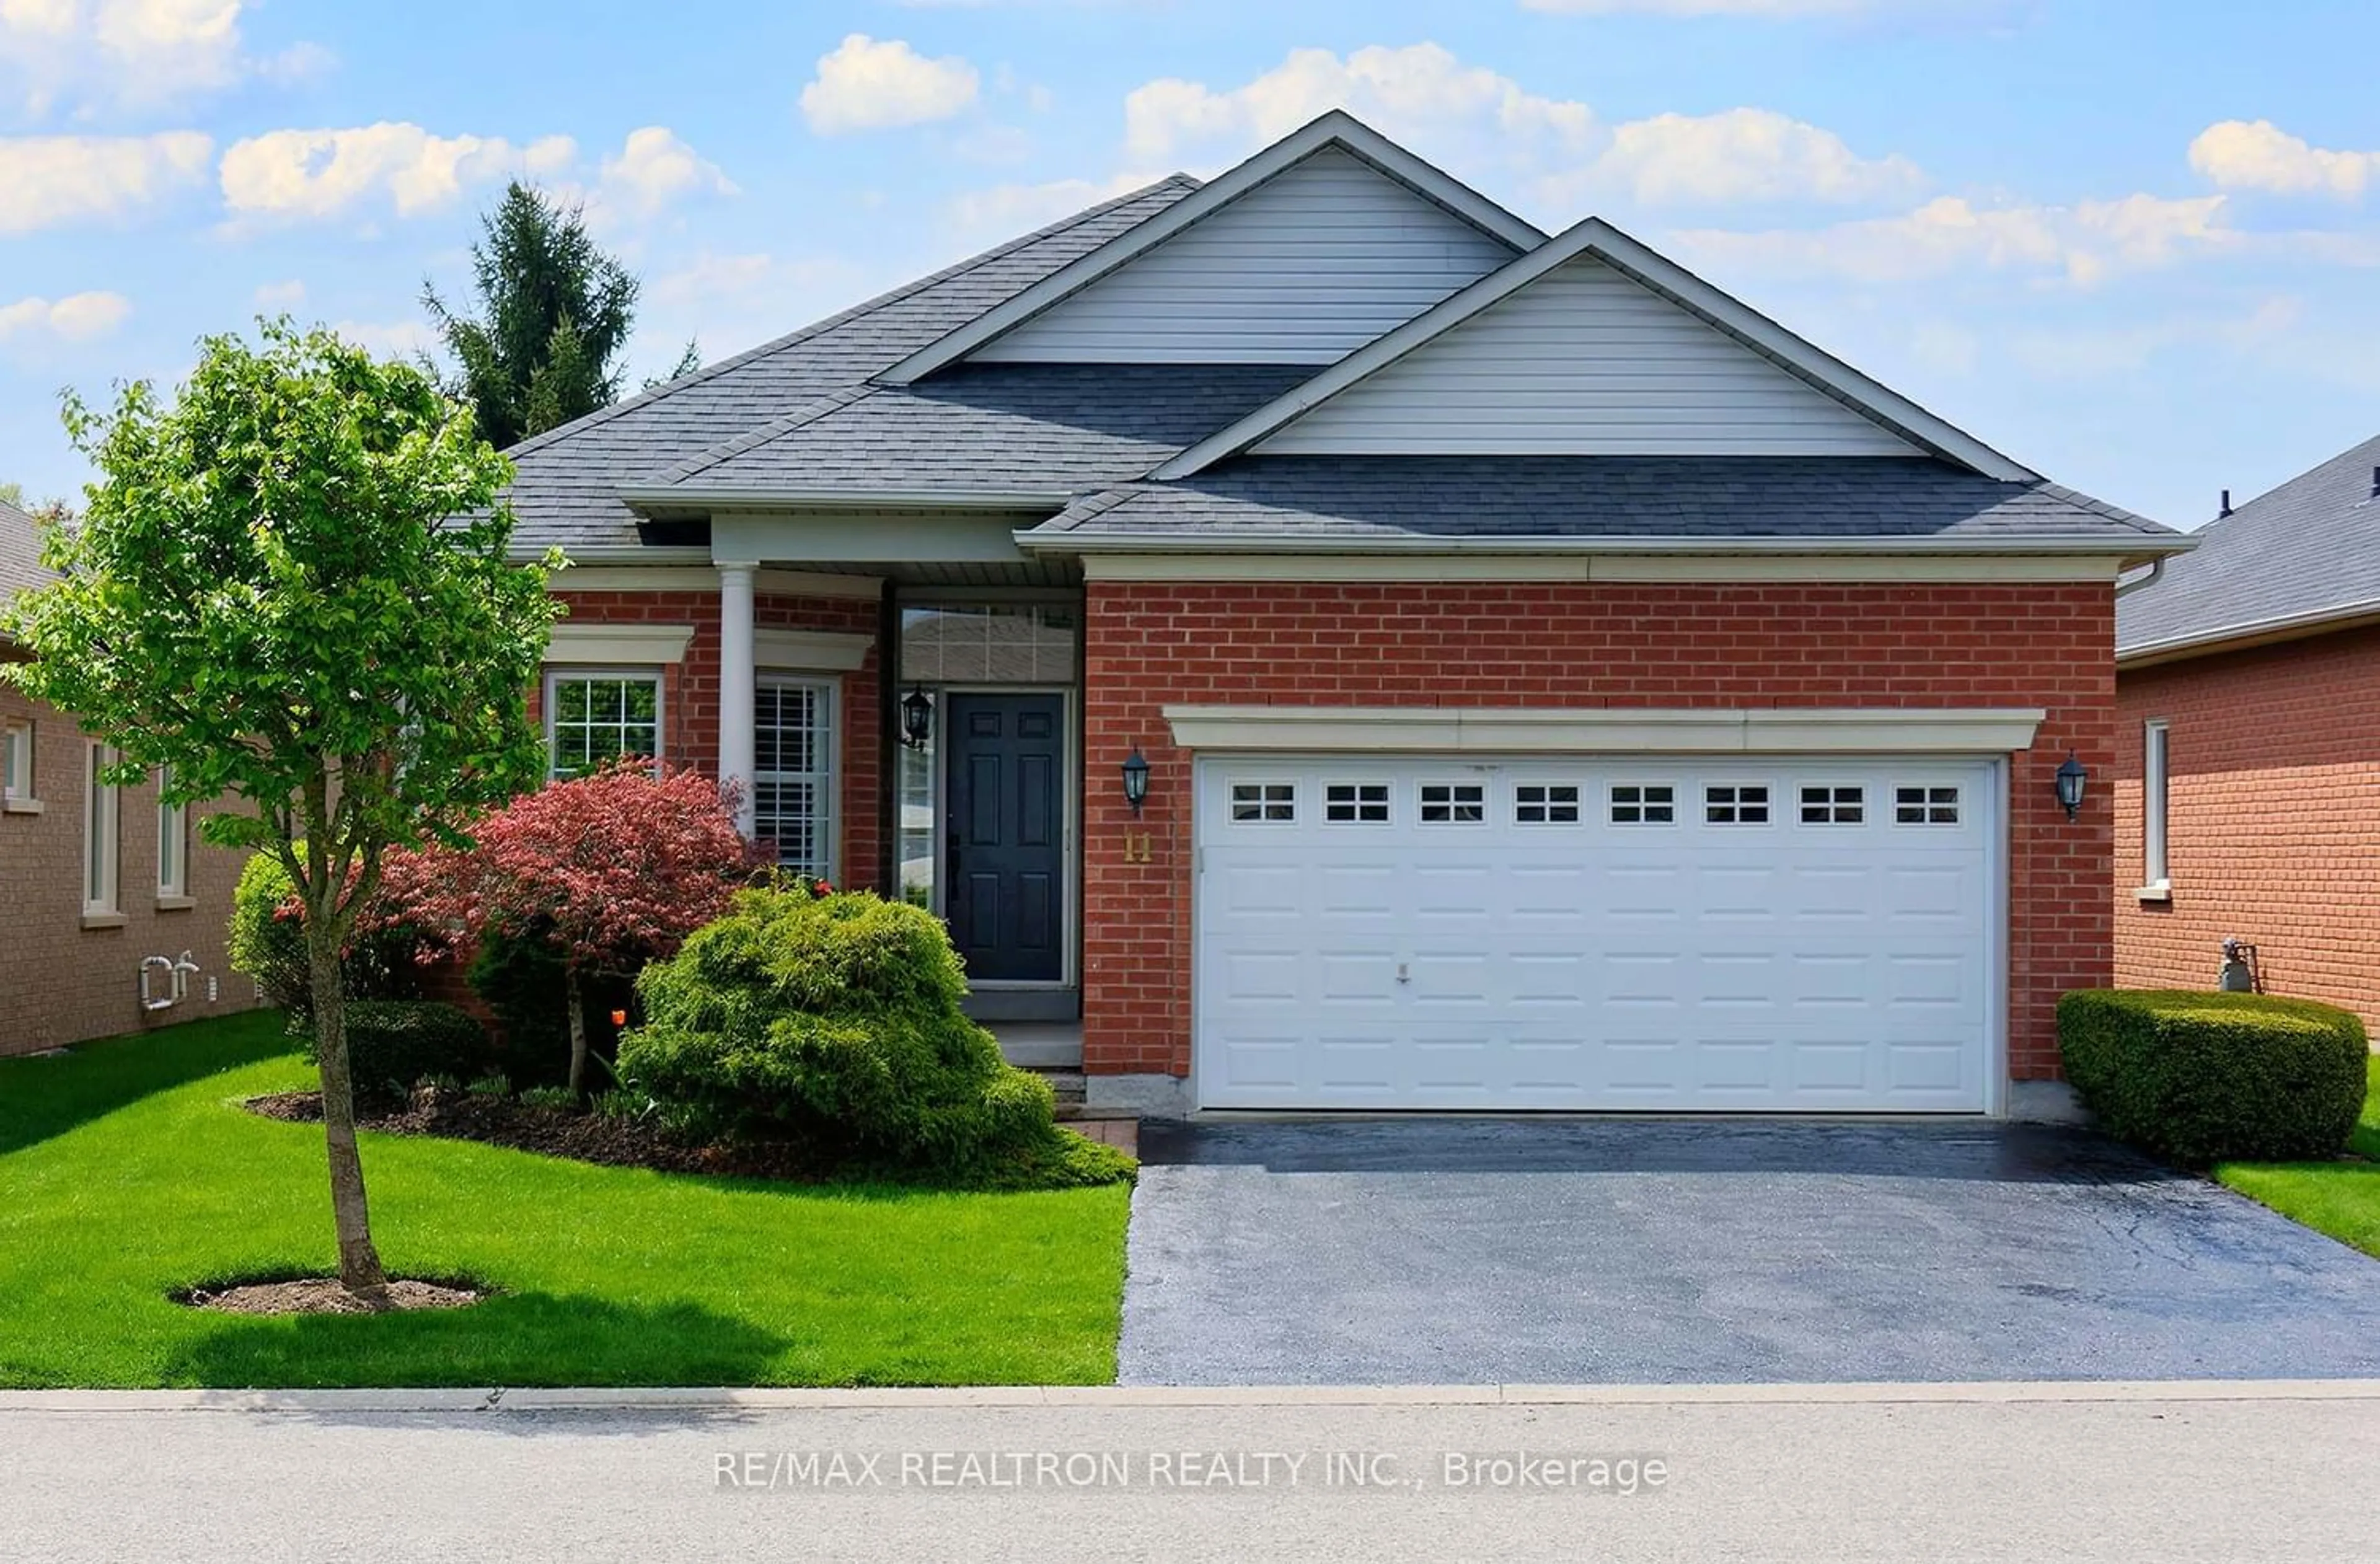 Home with brick exterior material for 11 Couples Gallery, Whitchurch-Stouffville Ontario L4A 1M6